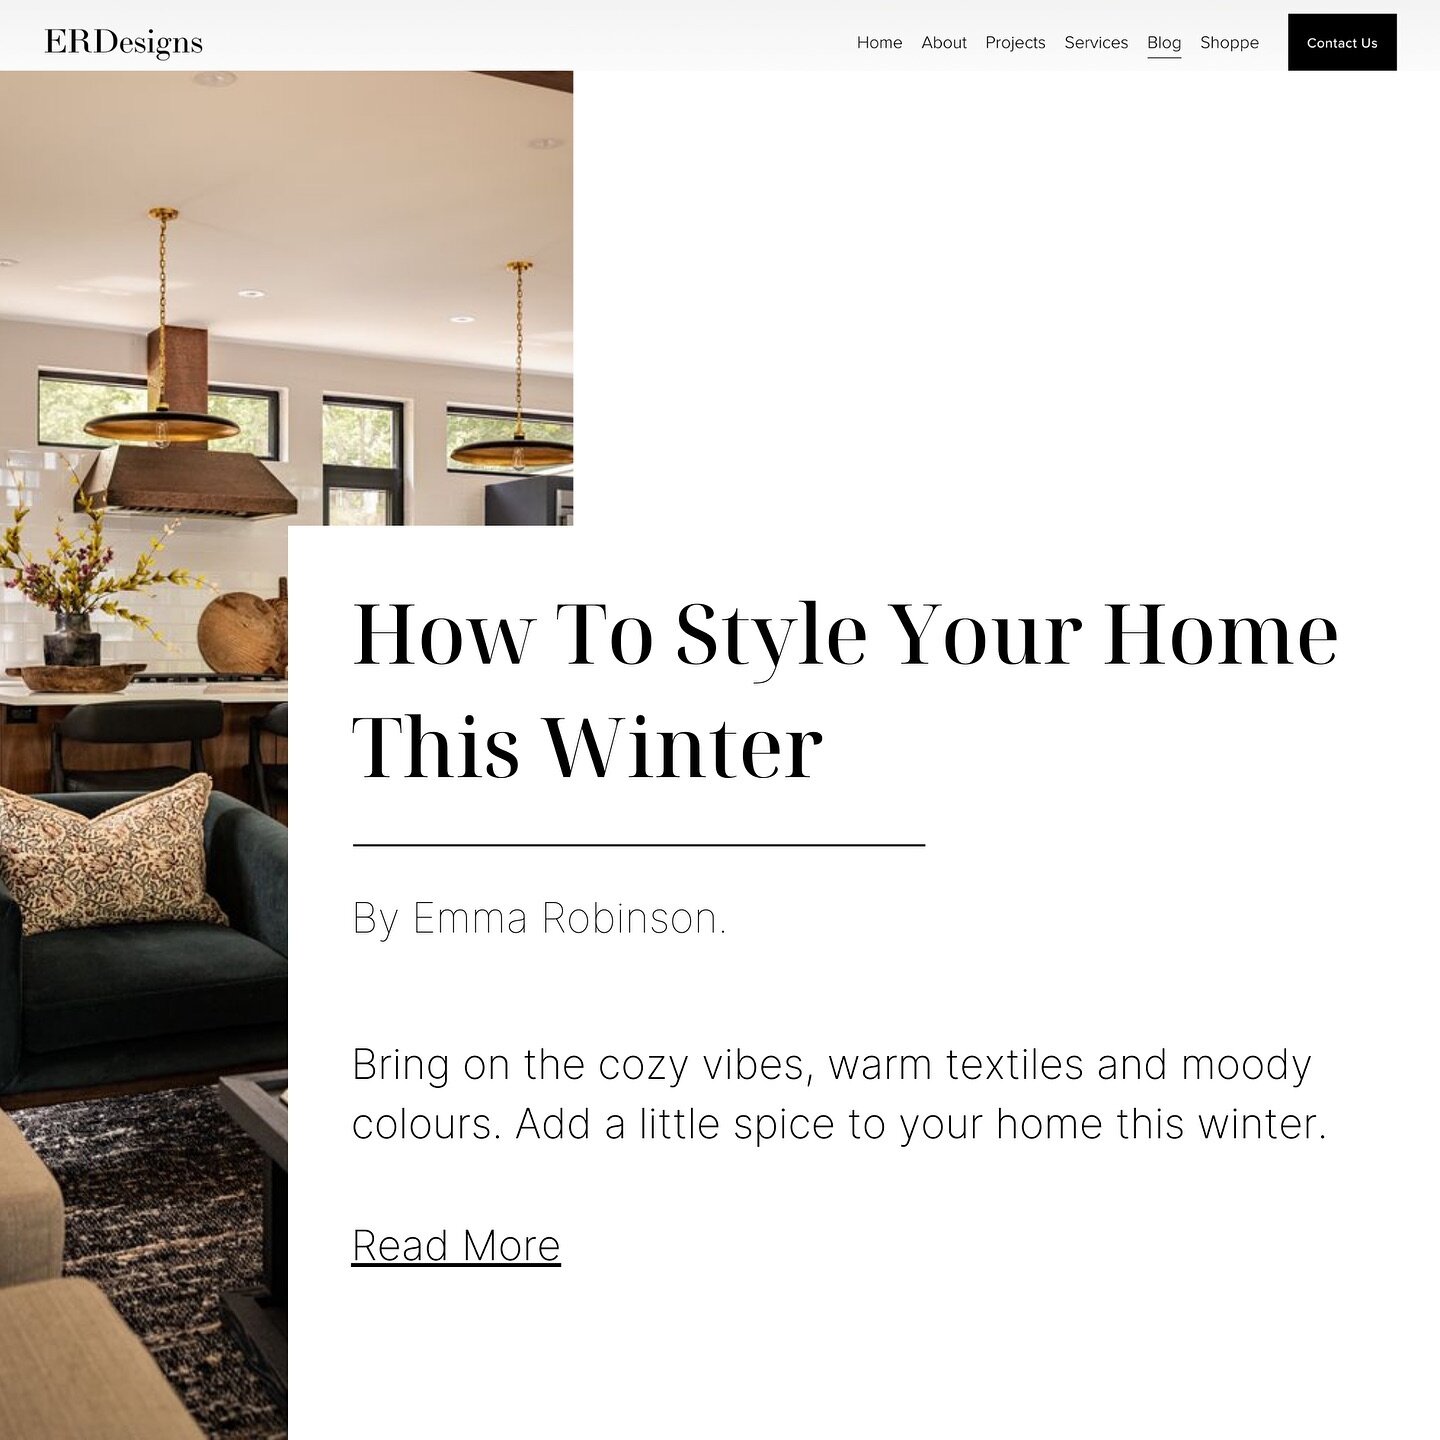 New blogs now live 🎉

Learn how to style your home this winter to keep mental health up and learn 13 interior design phrases to help you in your home renovation project! 

Go to www.erdesignsinc.ca to check them out now!

Make sure to keep checking 